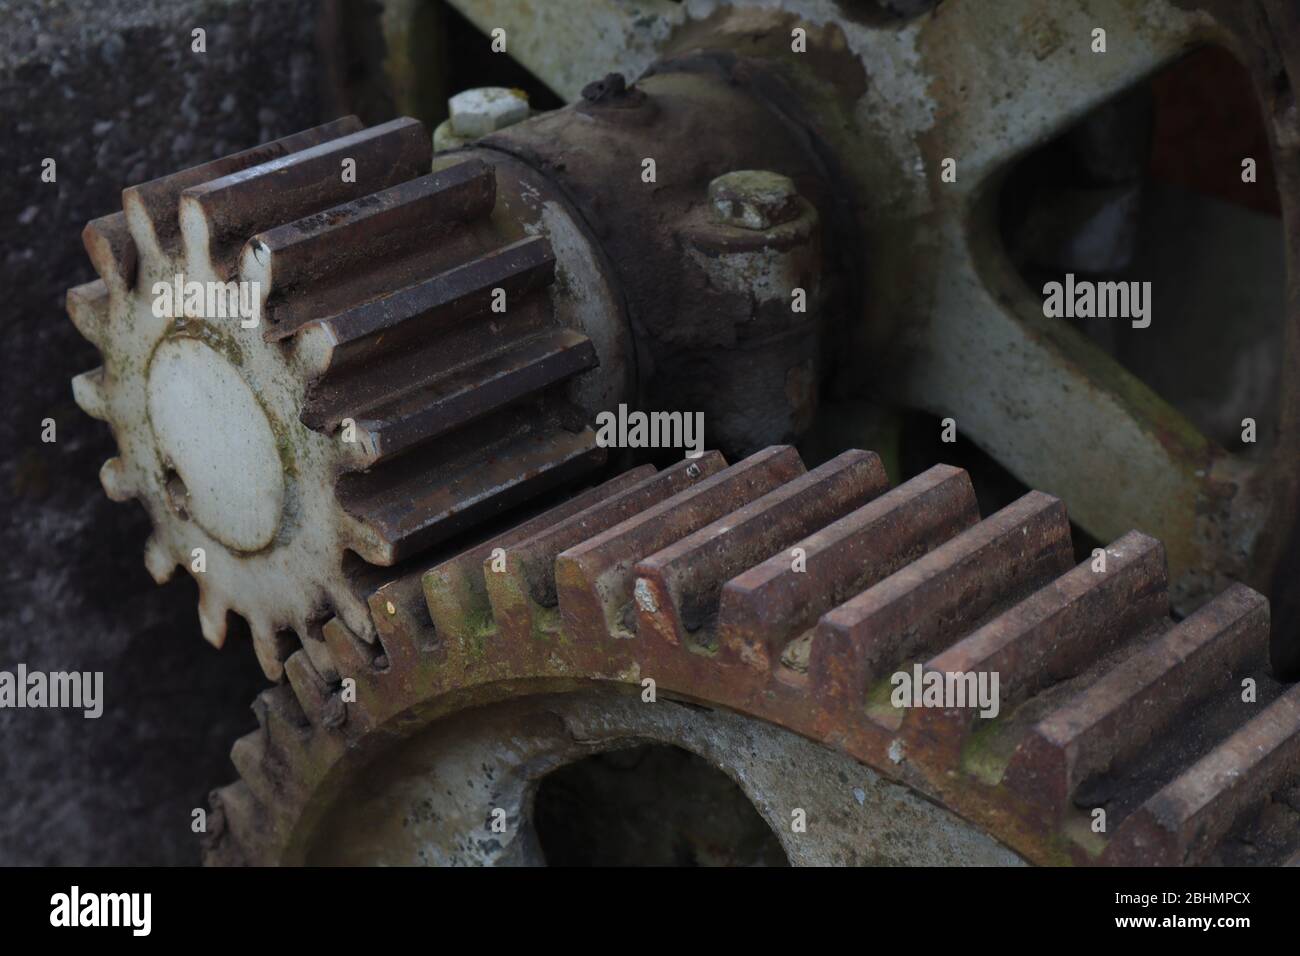 Metal teeth or cogs of gears fit together in an old gearbox Stock Photo